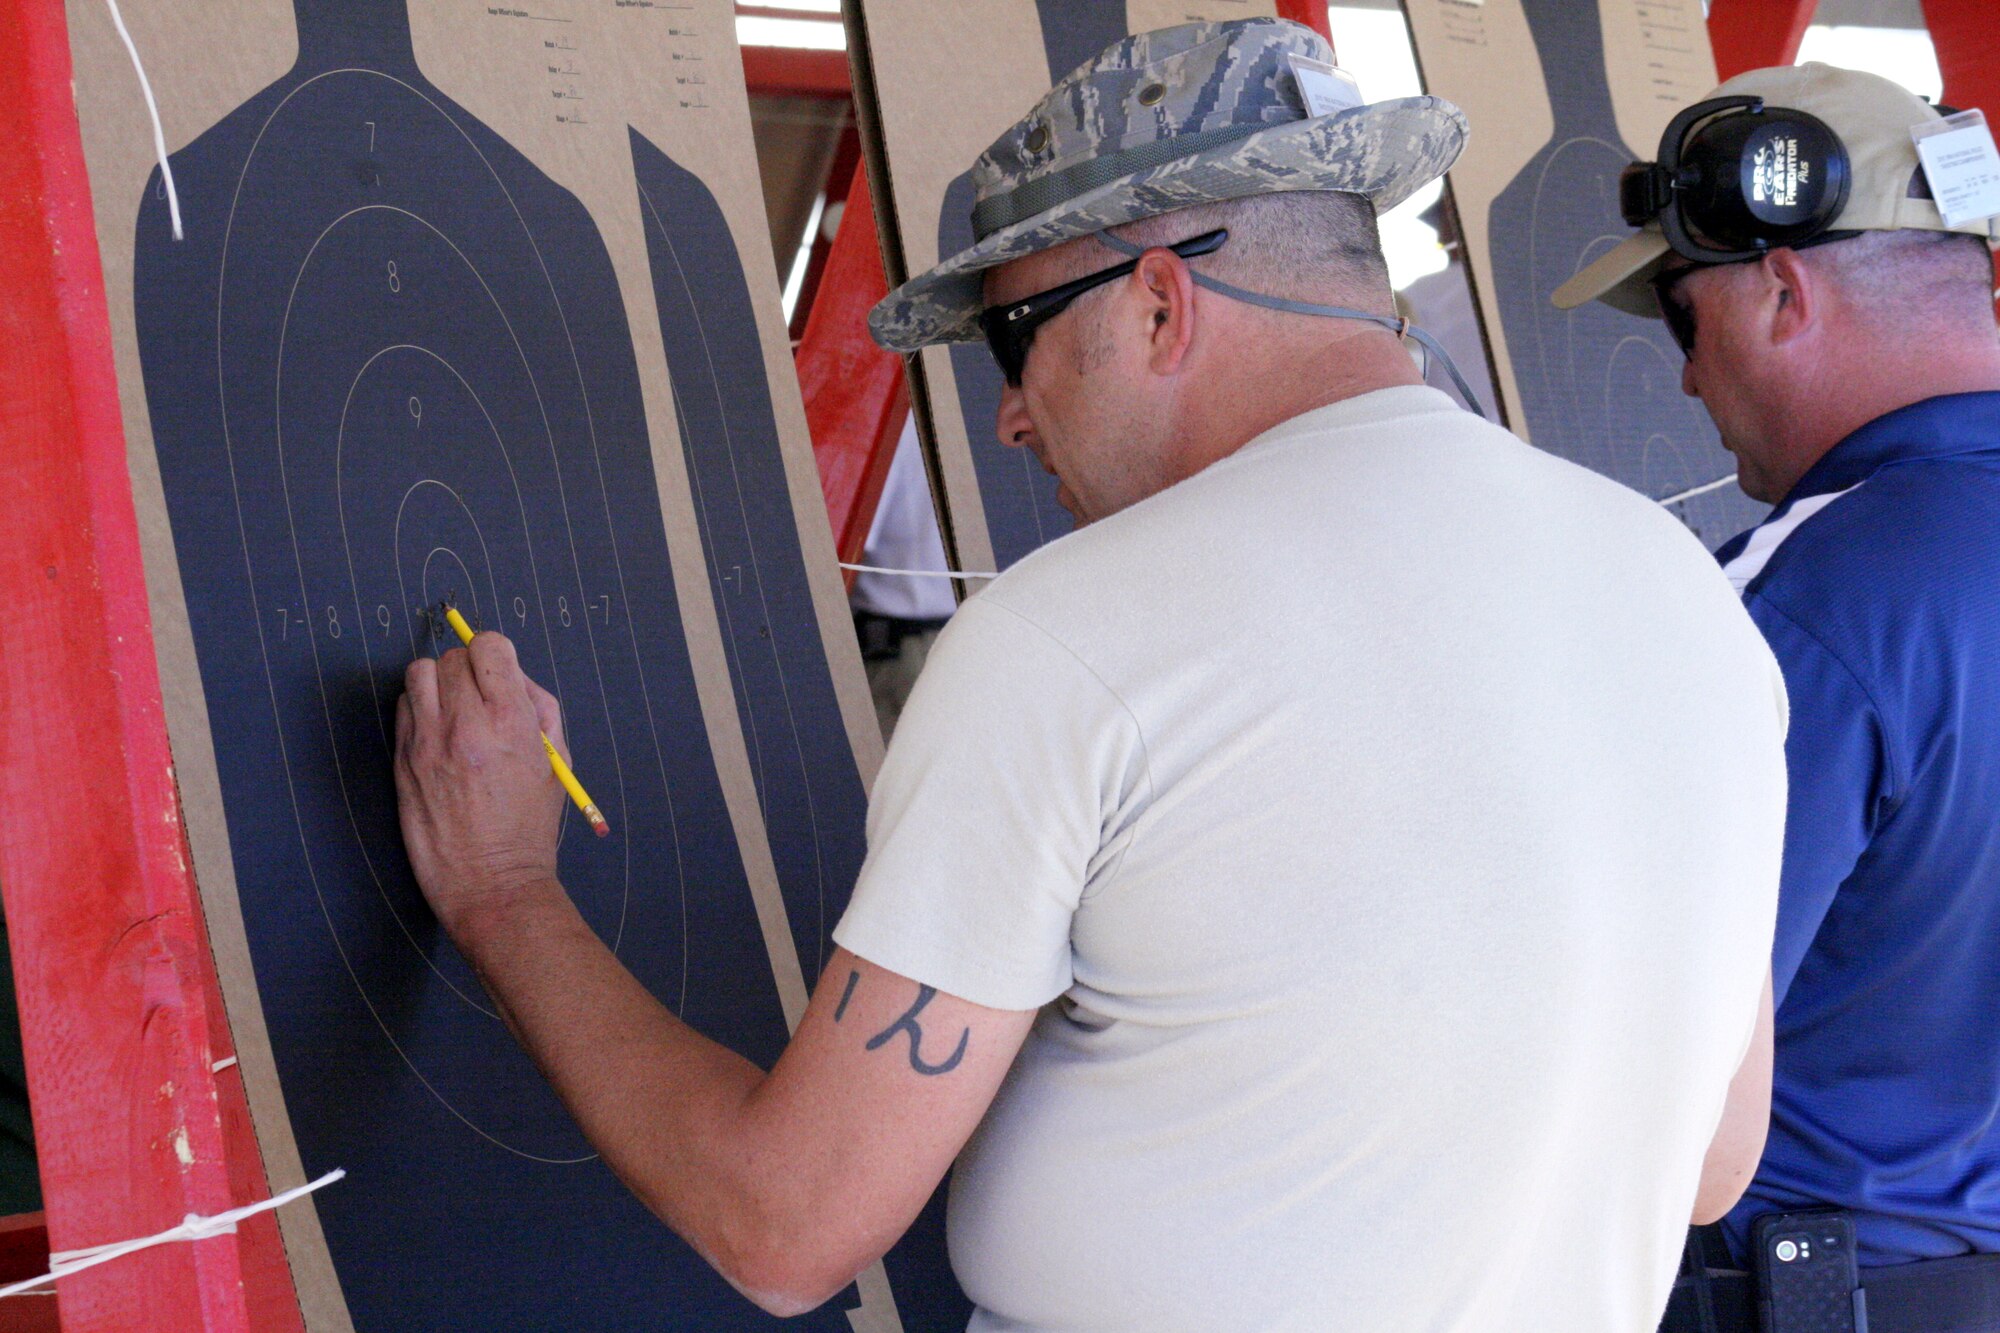 Master Sgt. Mark Long, assigned to the 377th Security Forces Squadron at Kirtland AFB, N.M., scores a target Sept. 21 at the National Police Shooting Championship in Albuquerque.   Photo courtesy of NRAblog.com 